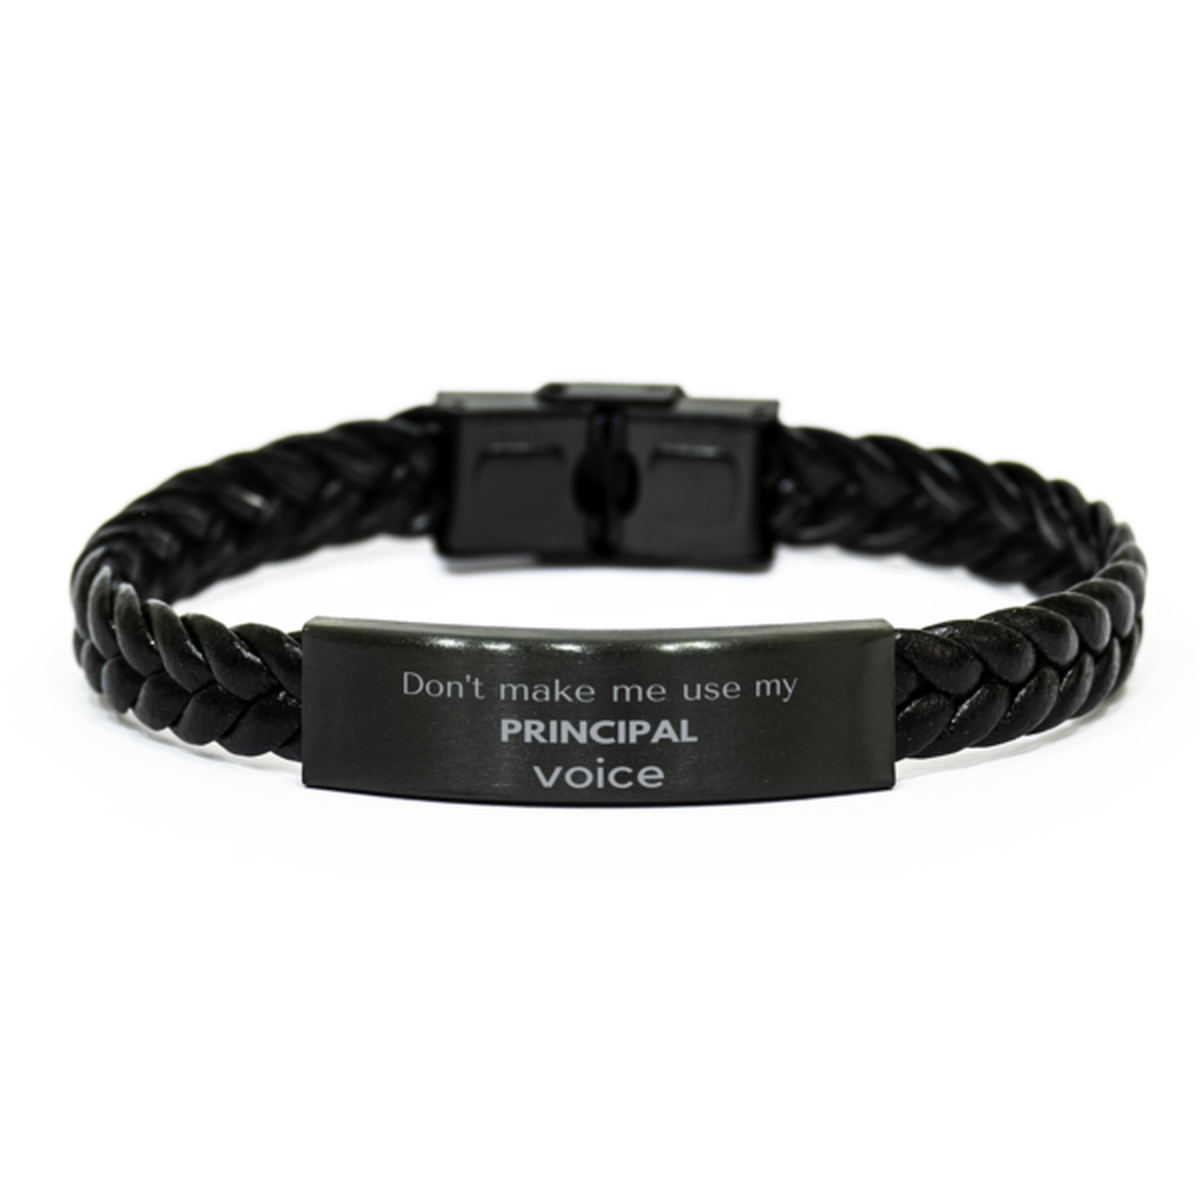 Don't make me use my Principal voice, Sarcasm Principal Gifts, Christmas Principal Braided Leather Bracelet Birthday Unique Gifts For Principal Coworkers, Men, Women, Colleague, Friends